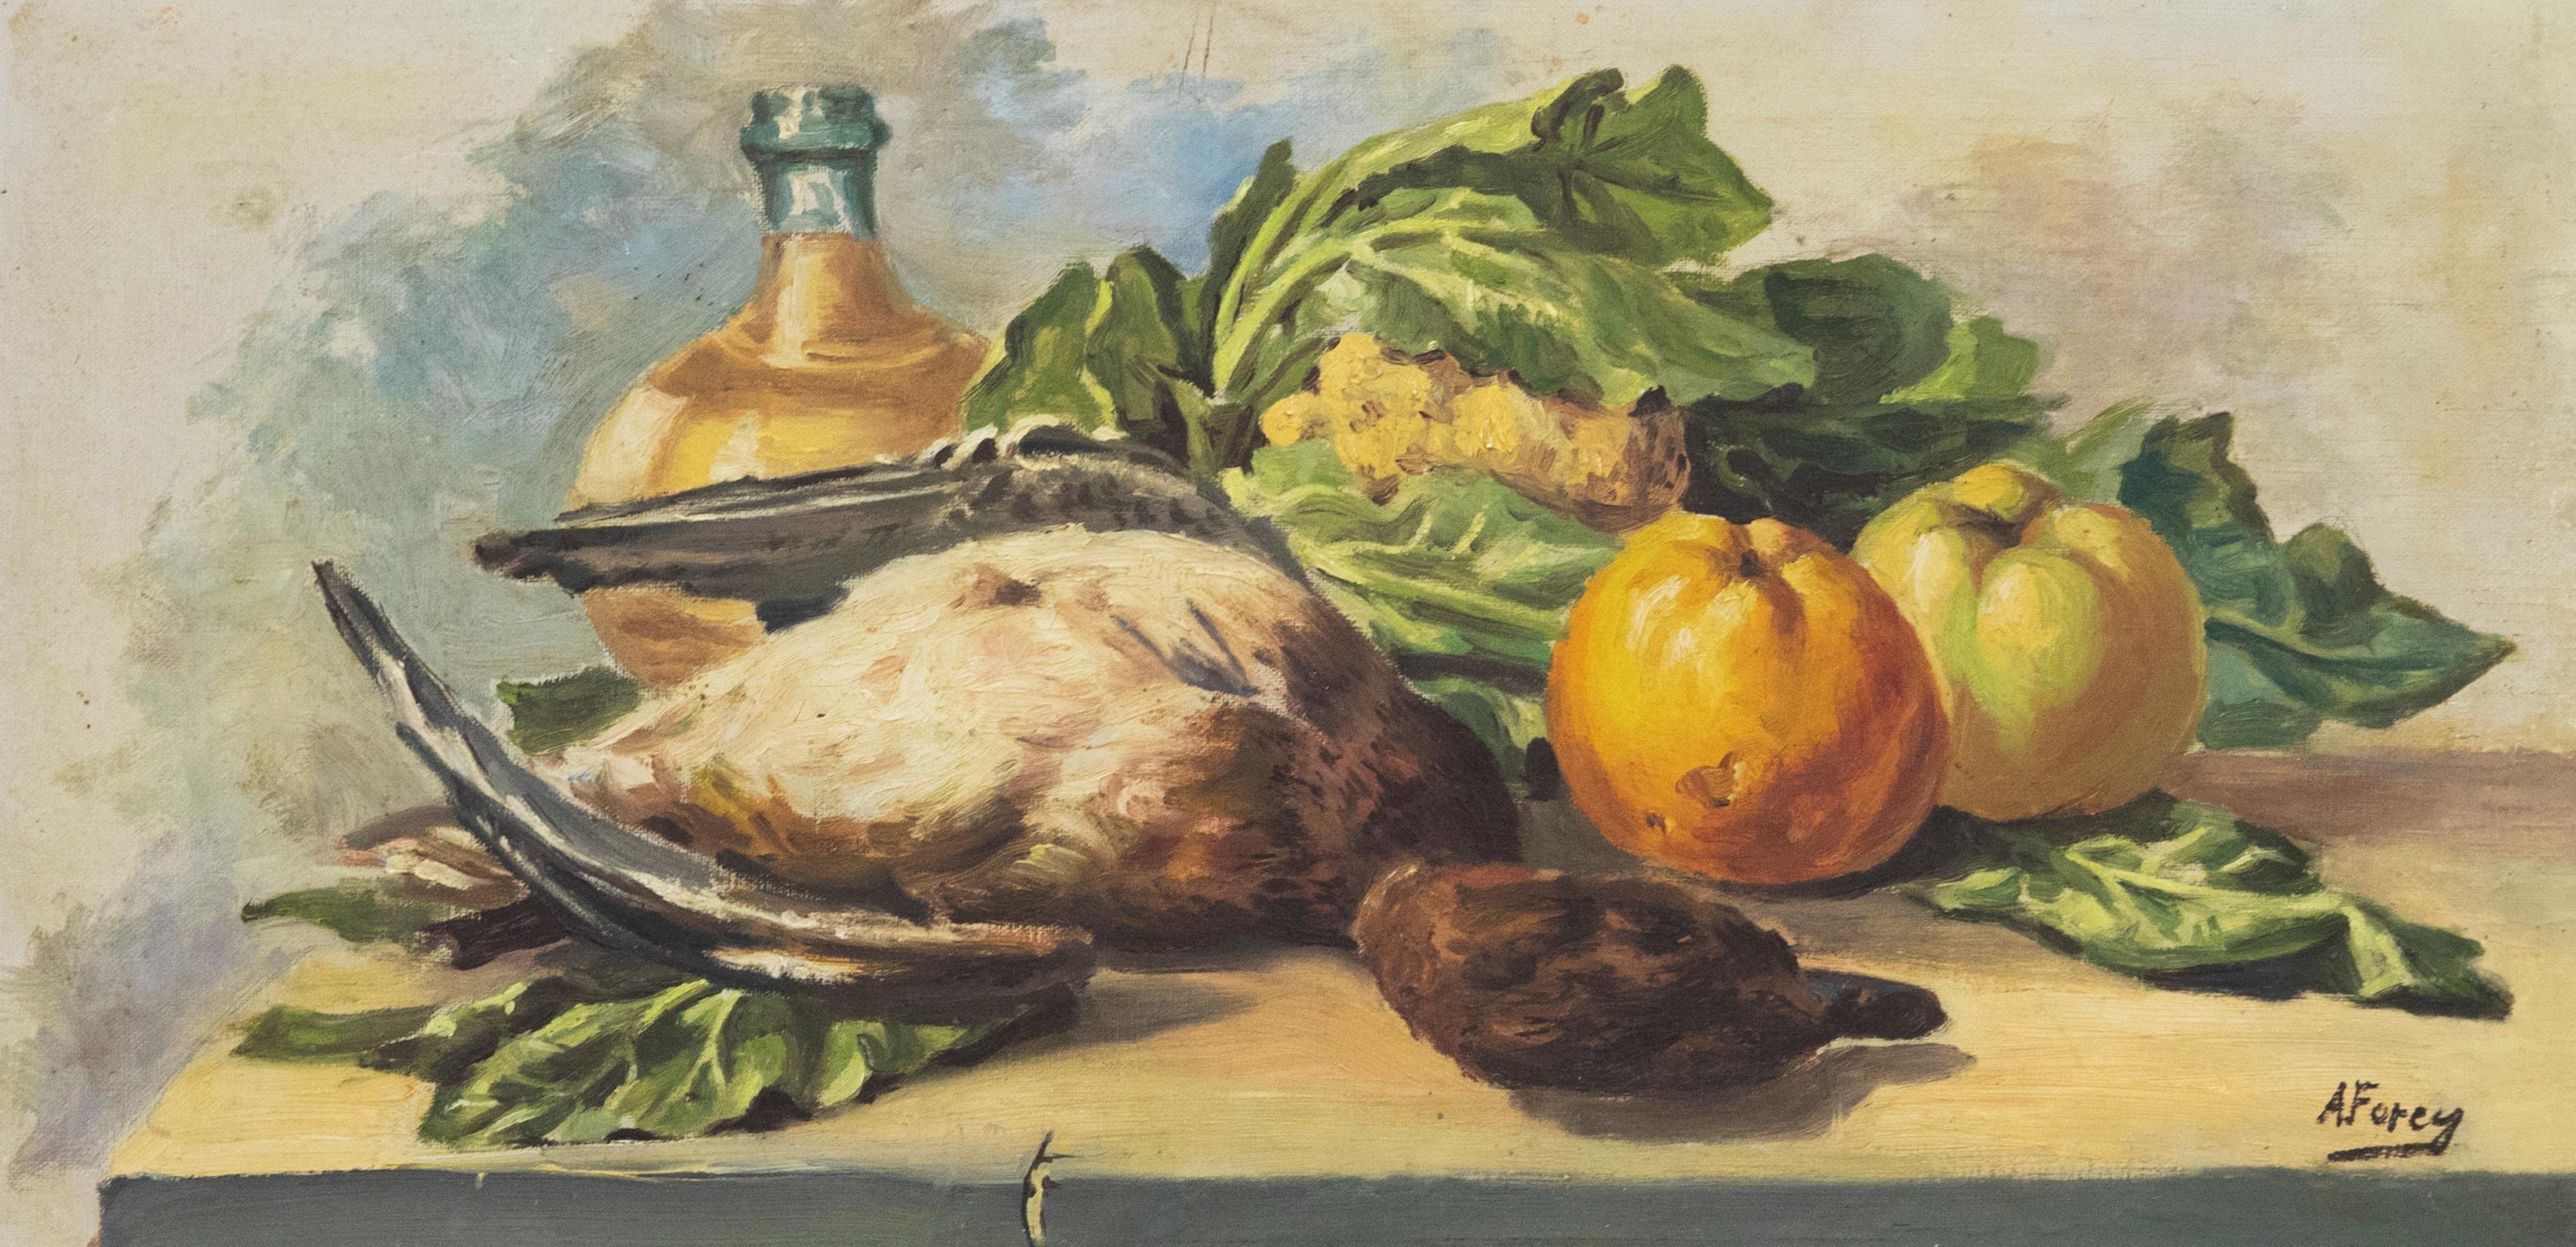 Unknown Still-Life Painting - A. Forey - Mid 20th Century Oil, Still Life with Bird